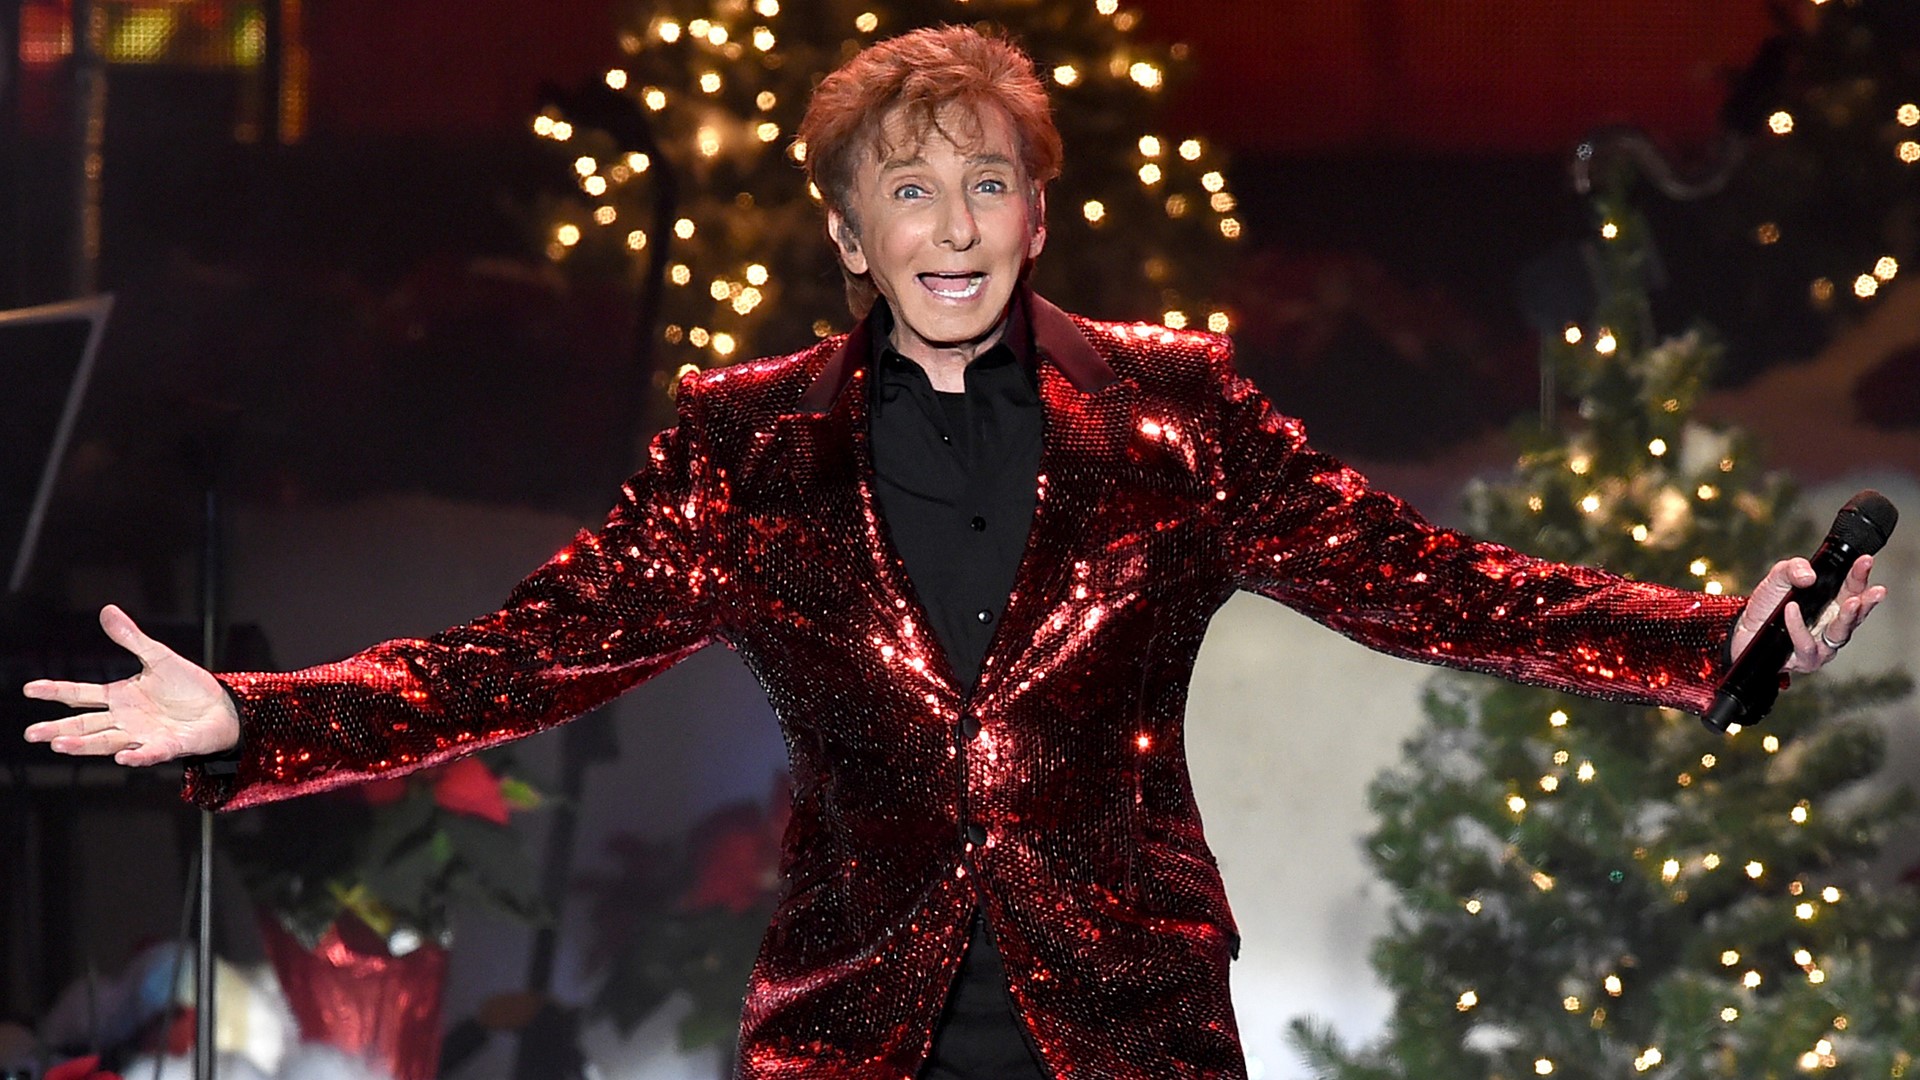 Barry Manilow to perform Christmas special at Amalie Arena in Tampa